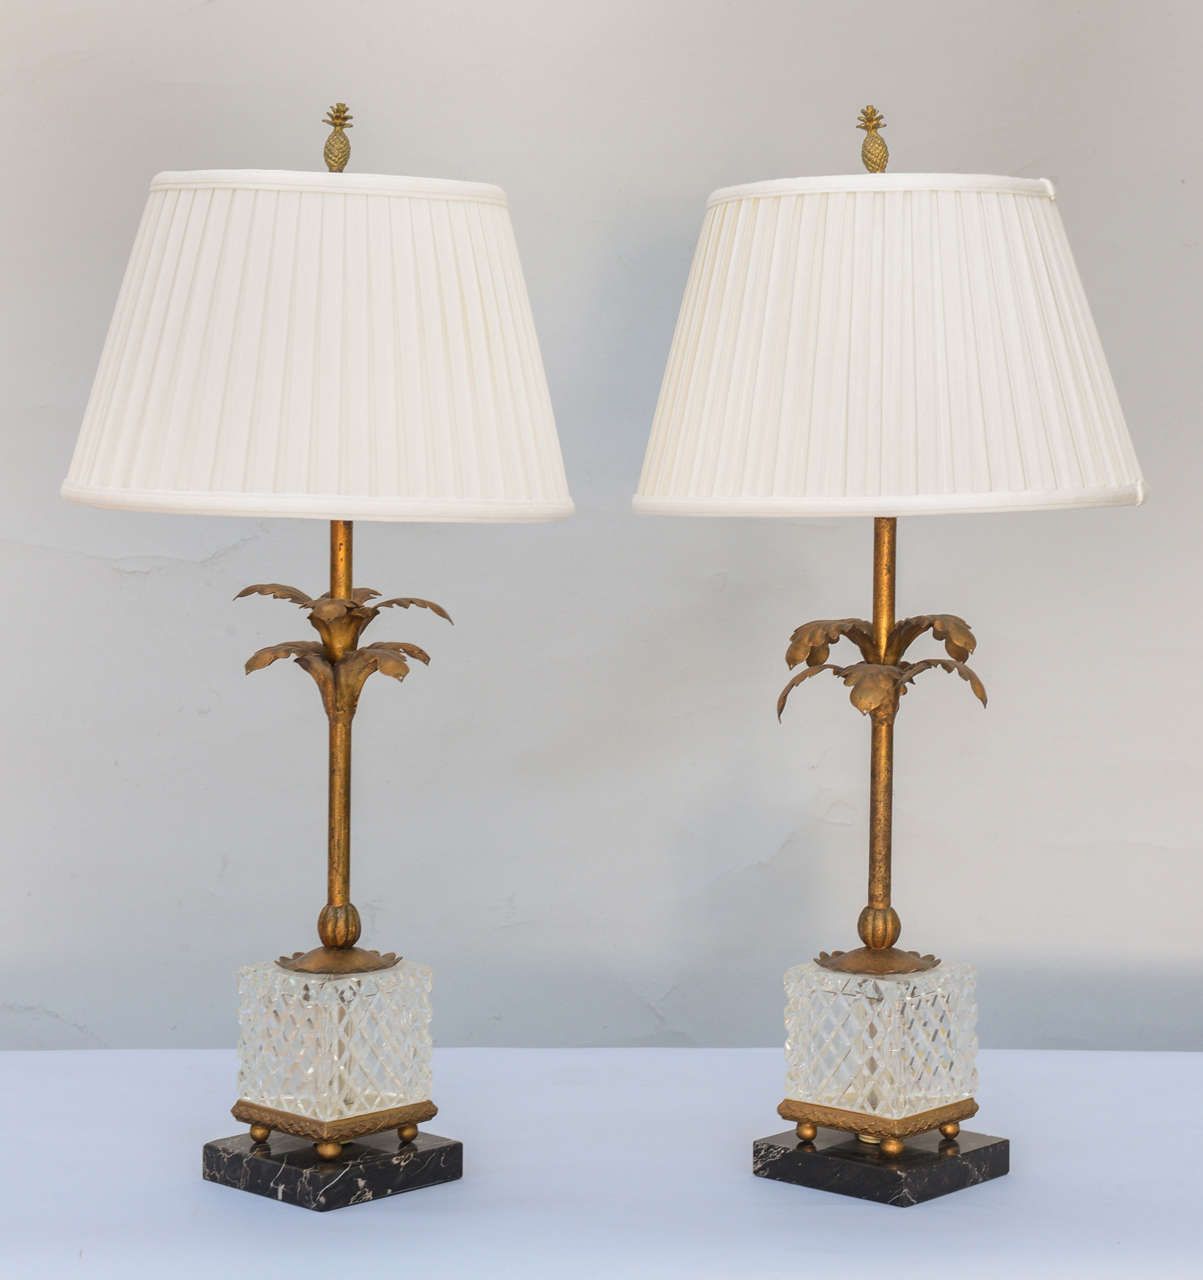 Pair of lamps, each a palm tree of gilded iron, in a cube shaped "planter" of diamond pattern glass on ball feet, set upon a square plinth of black marble.   Shown with shades (not included).

Stock ID: D6900